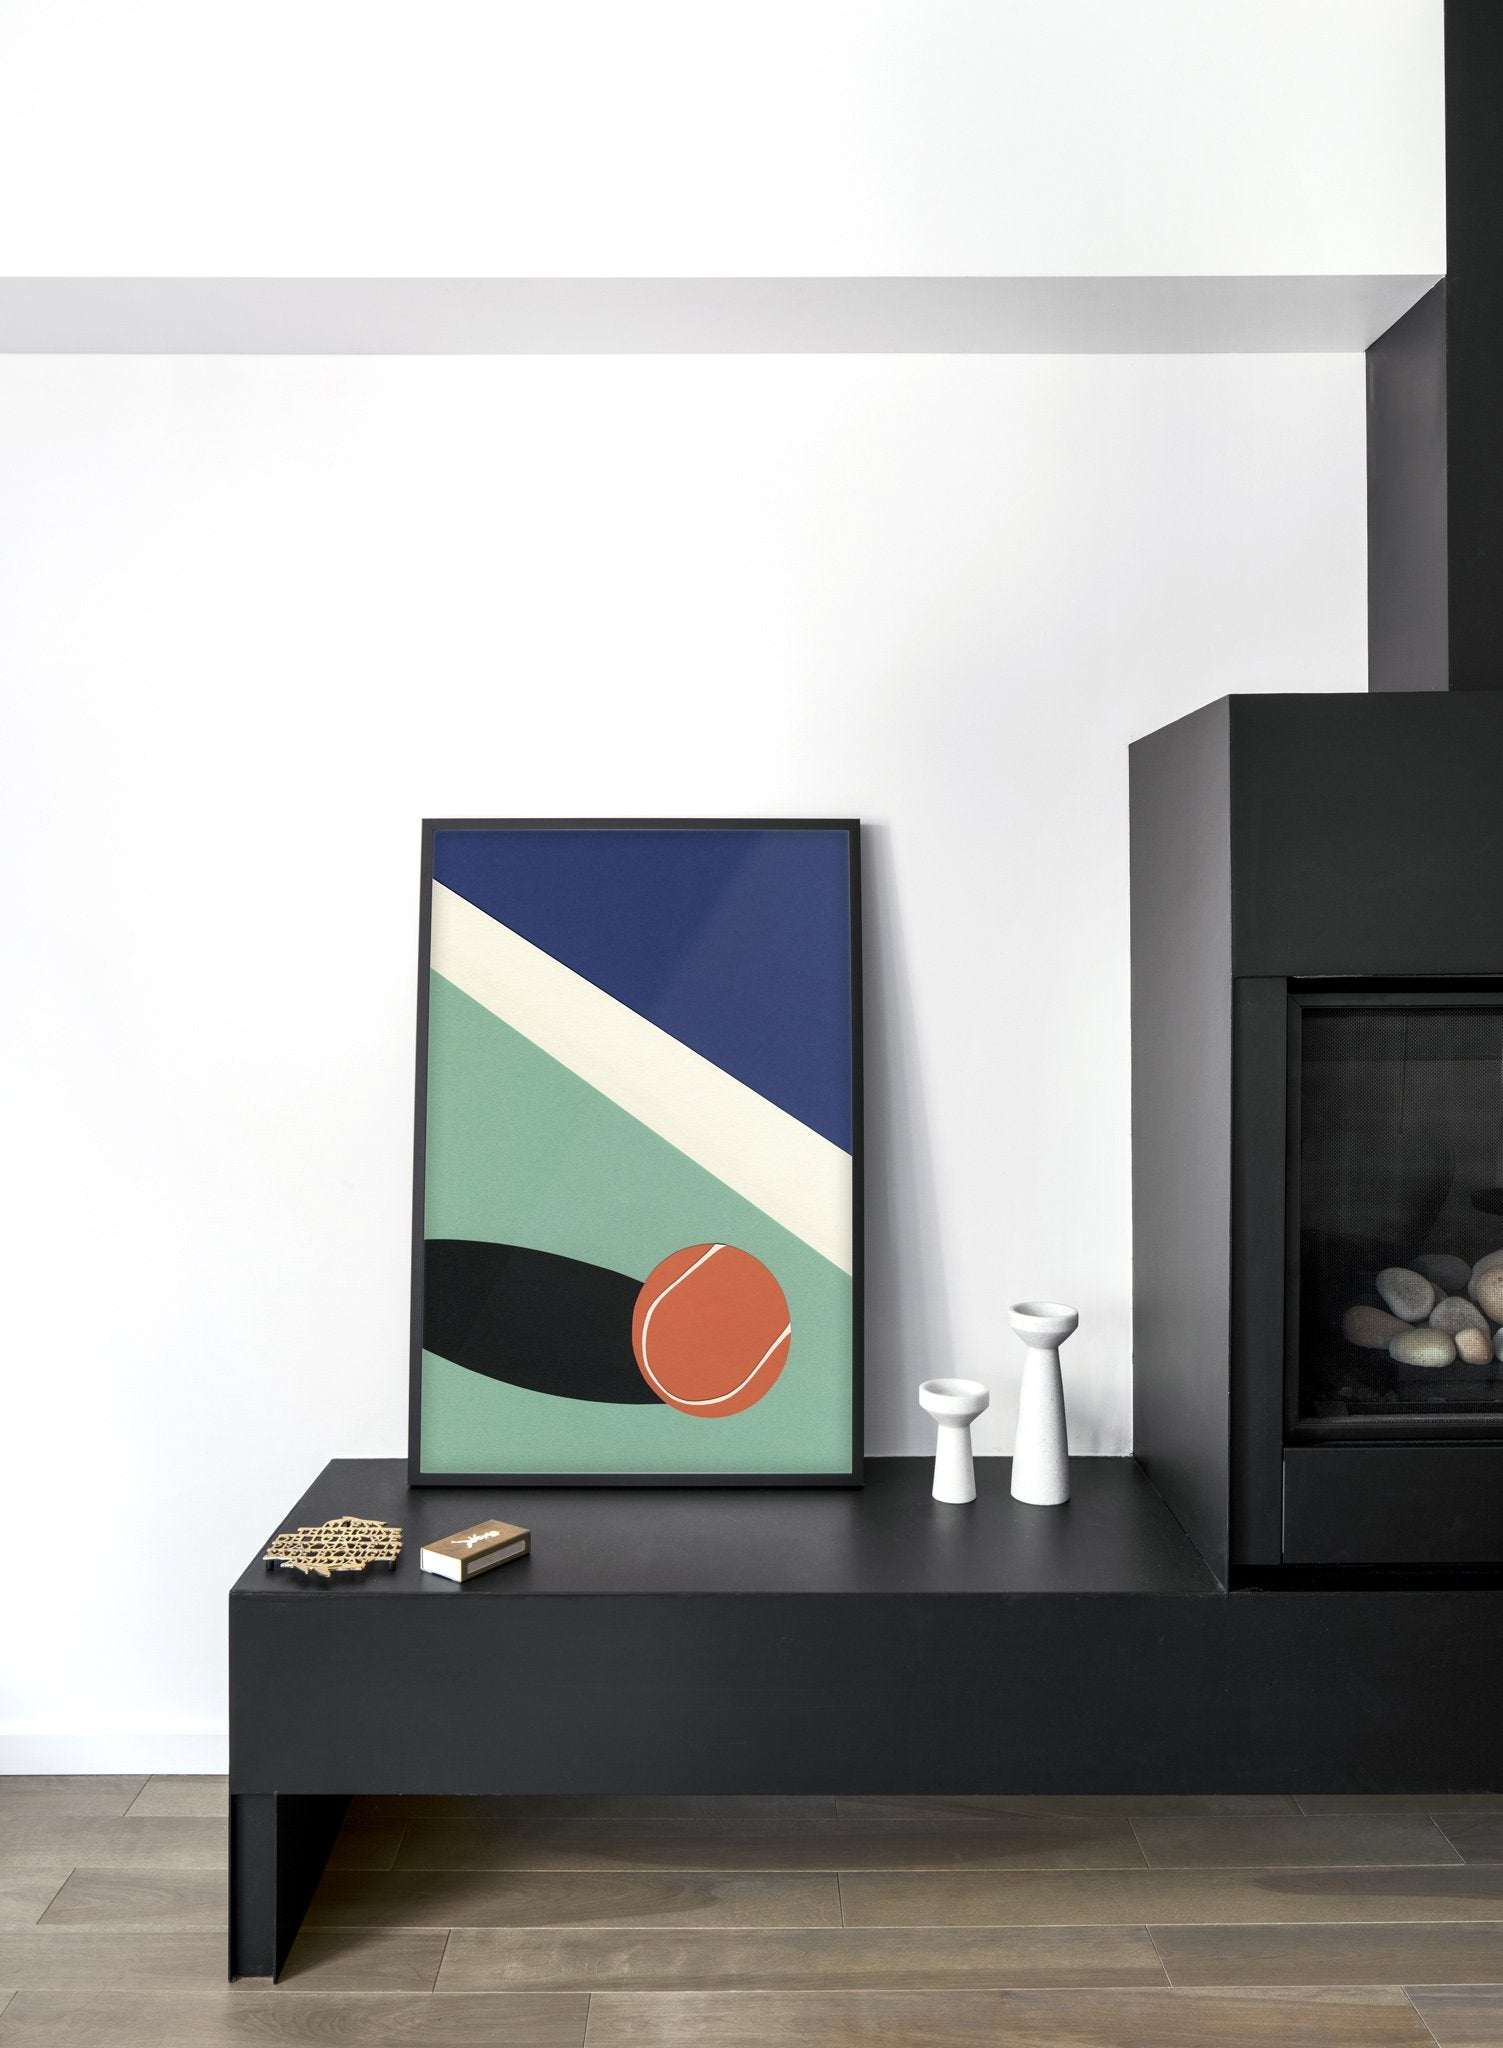 Modern minimalist poster by Opposite Wall with abstract collage illustration of tennis ball on court - Living room with a fireplace